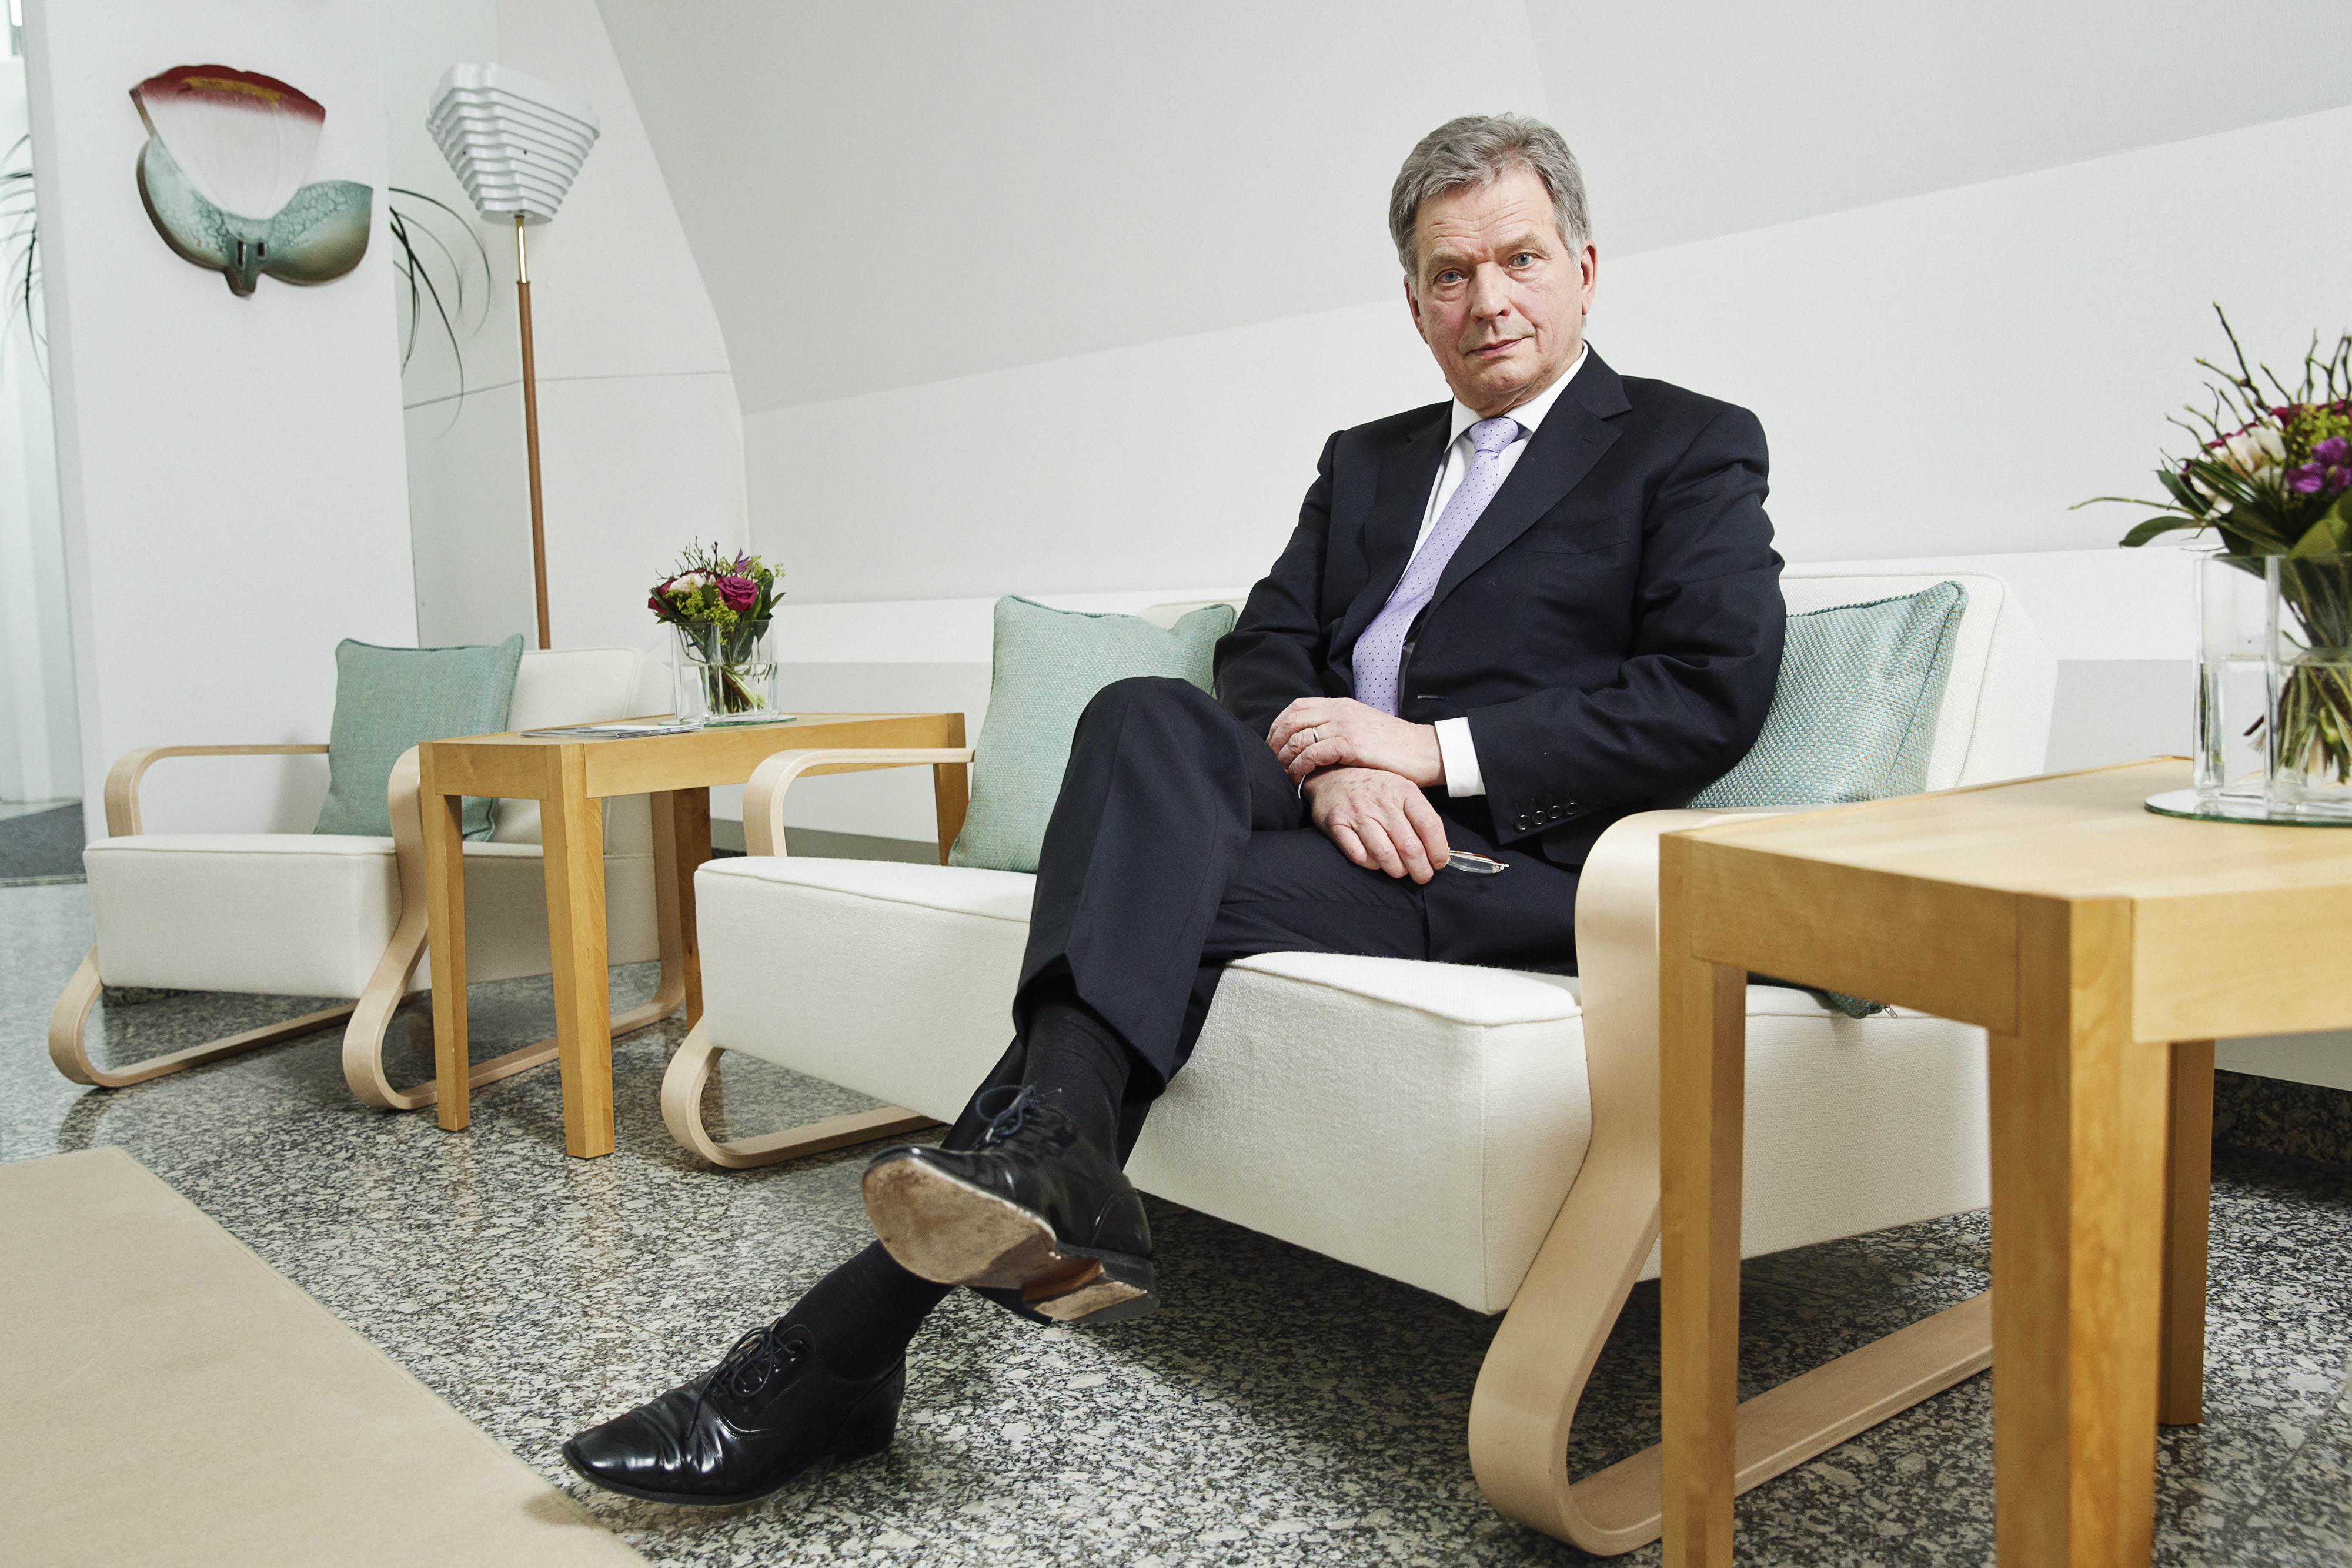 Sauli Niinisto, Finland's president, during an interview at his seaside residence in Helsinki, Finland, on Feb. 24, 2017. (Roni Rekomaa / Bloomberg)